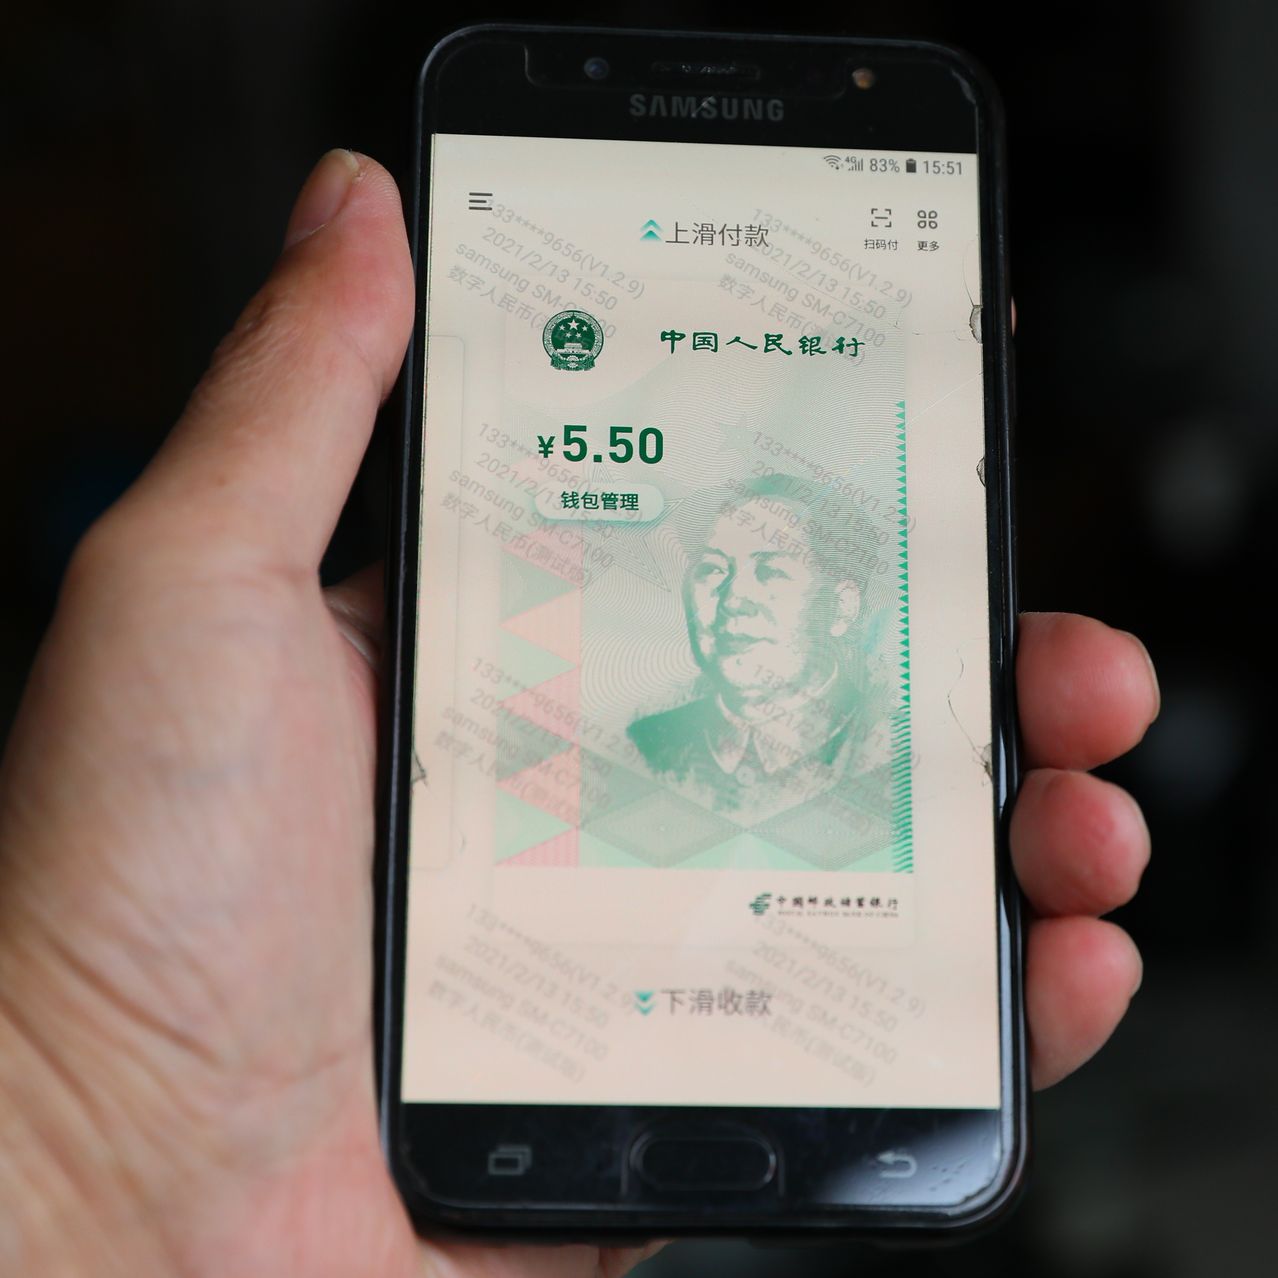 China's Digital Yuan App Launches New Feature for for Foreign Users